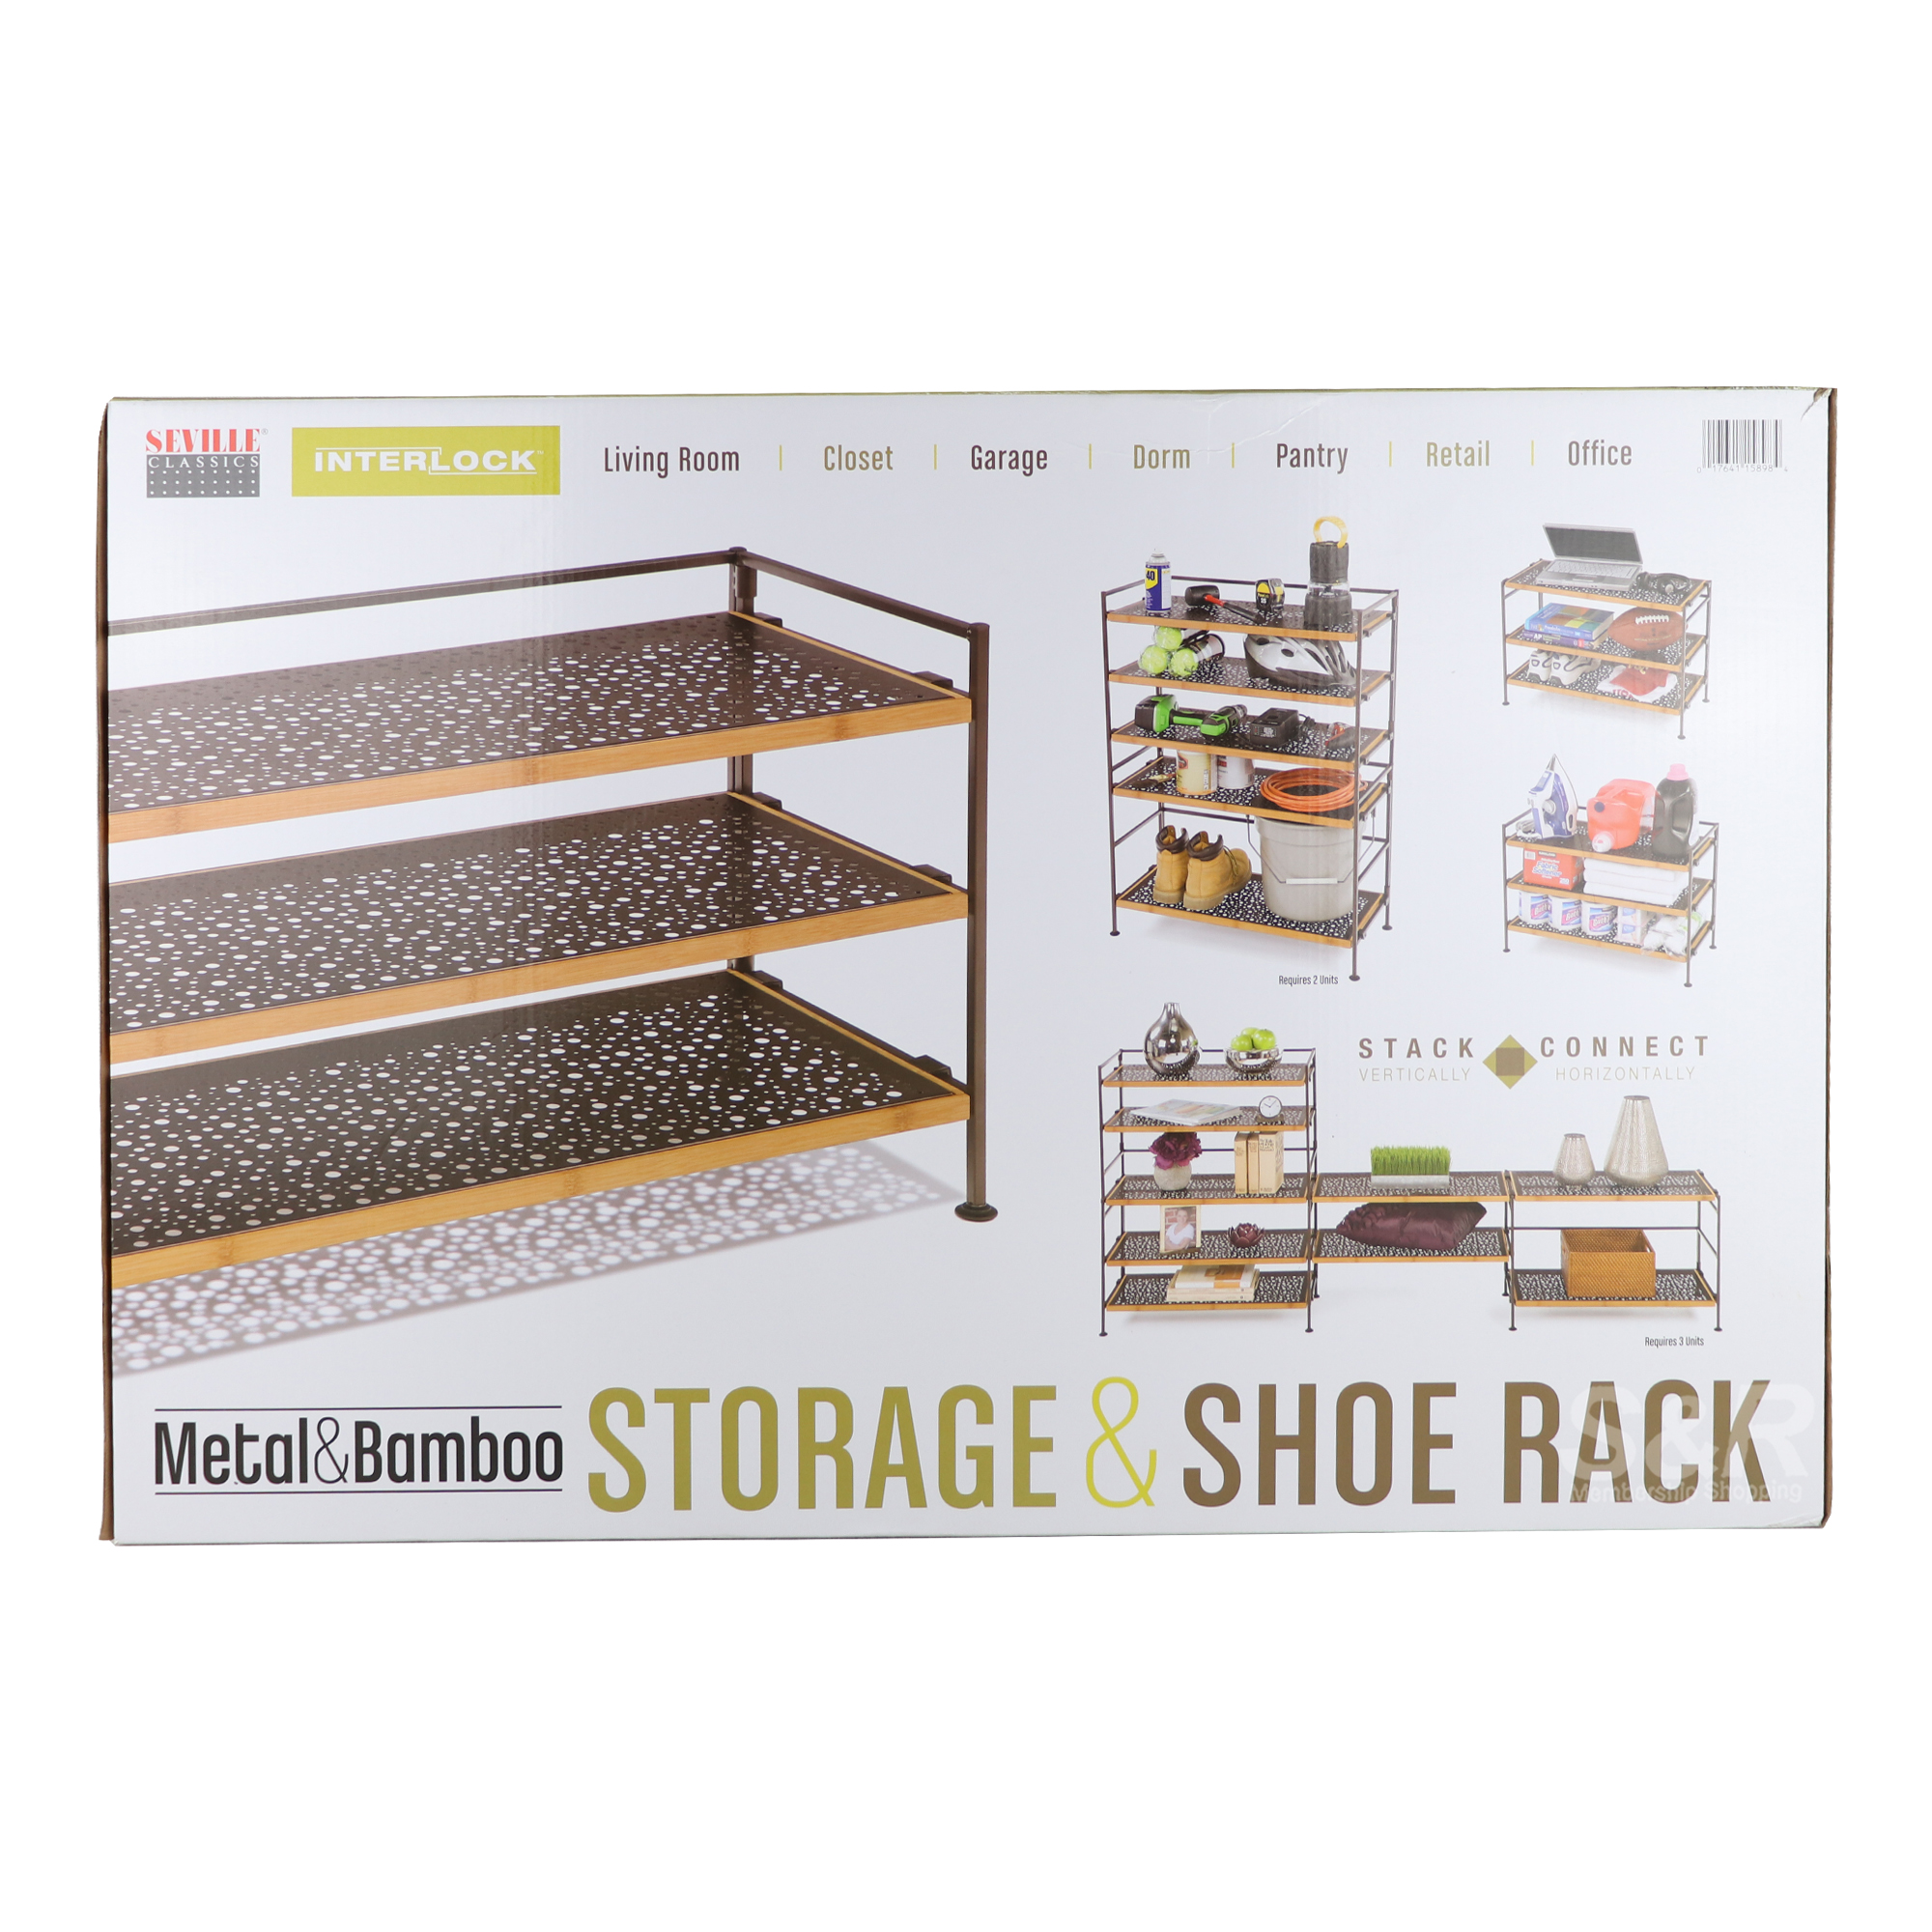 Seville Classics Metal and Bamboo Interlock Storage and Shoe Rack 1pc